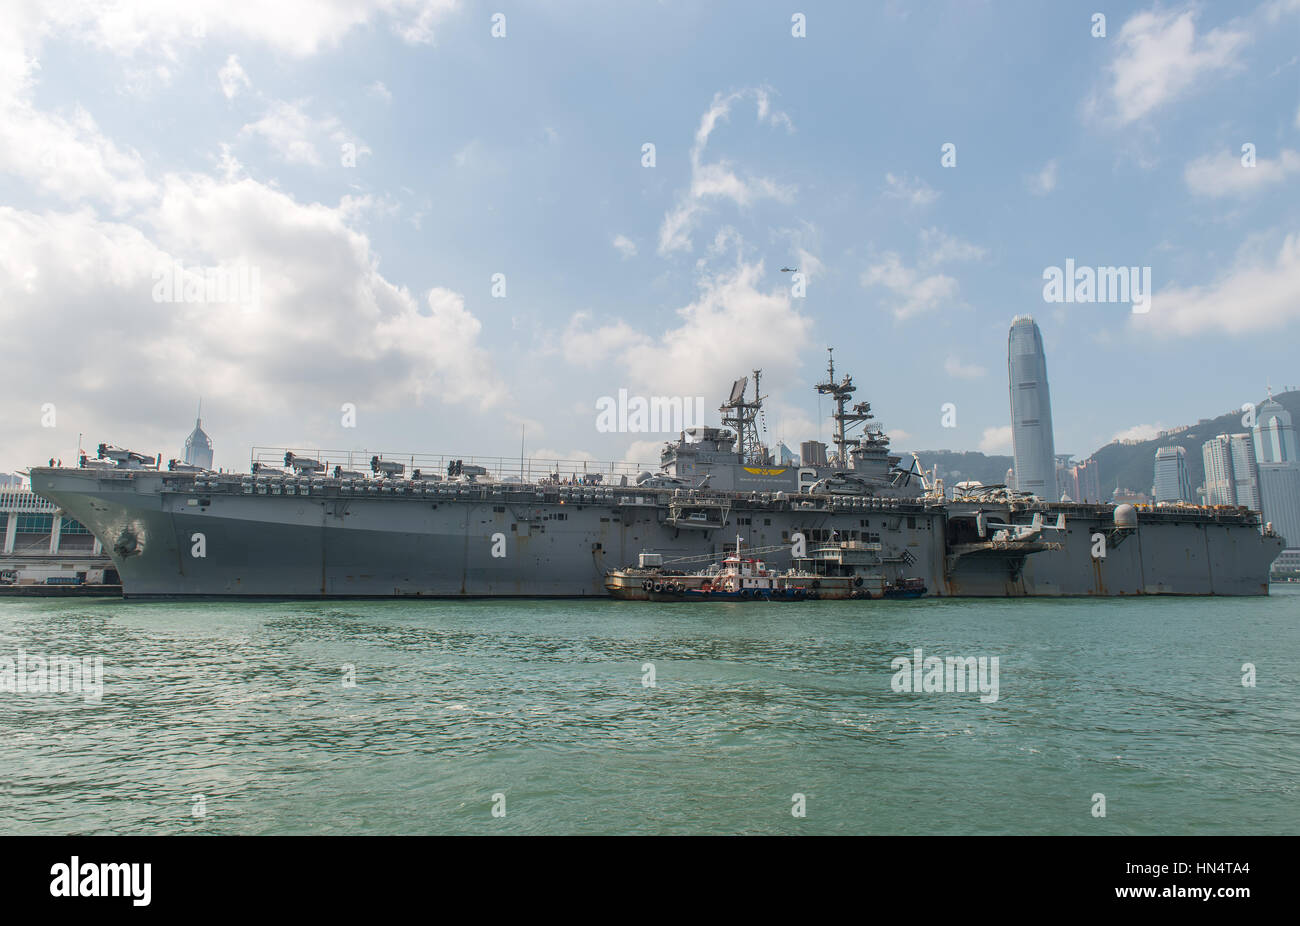 HONG KONG, CHINA - Sept 18:The U.S. amphibious assault ship USS Bonhomme Richard pulled in Hong Kong waters on Sept 18,2013 to get replenishment.Commi Stock Photo